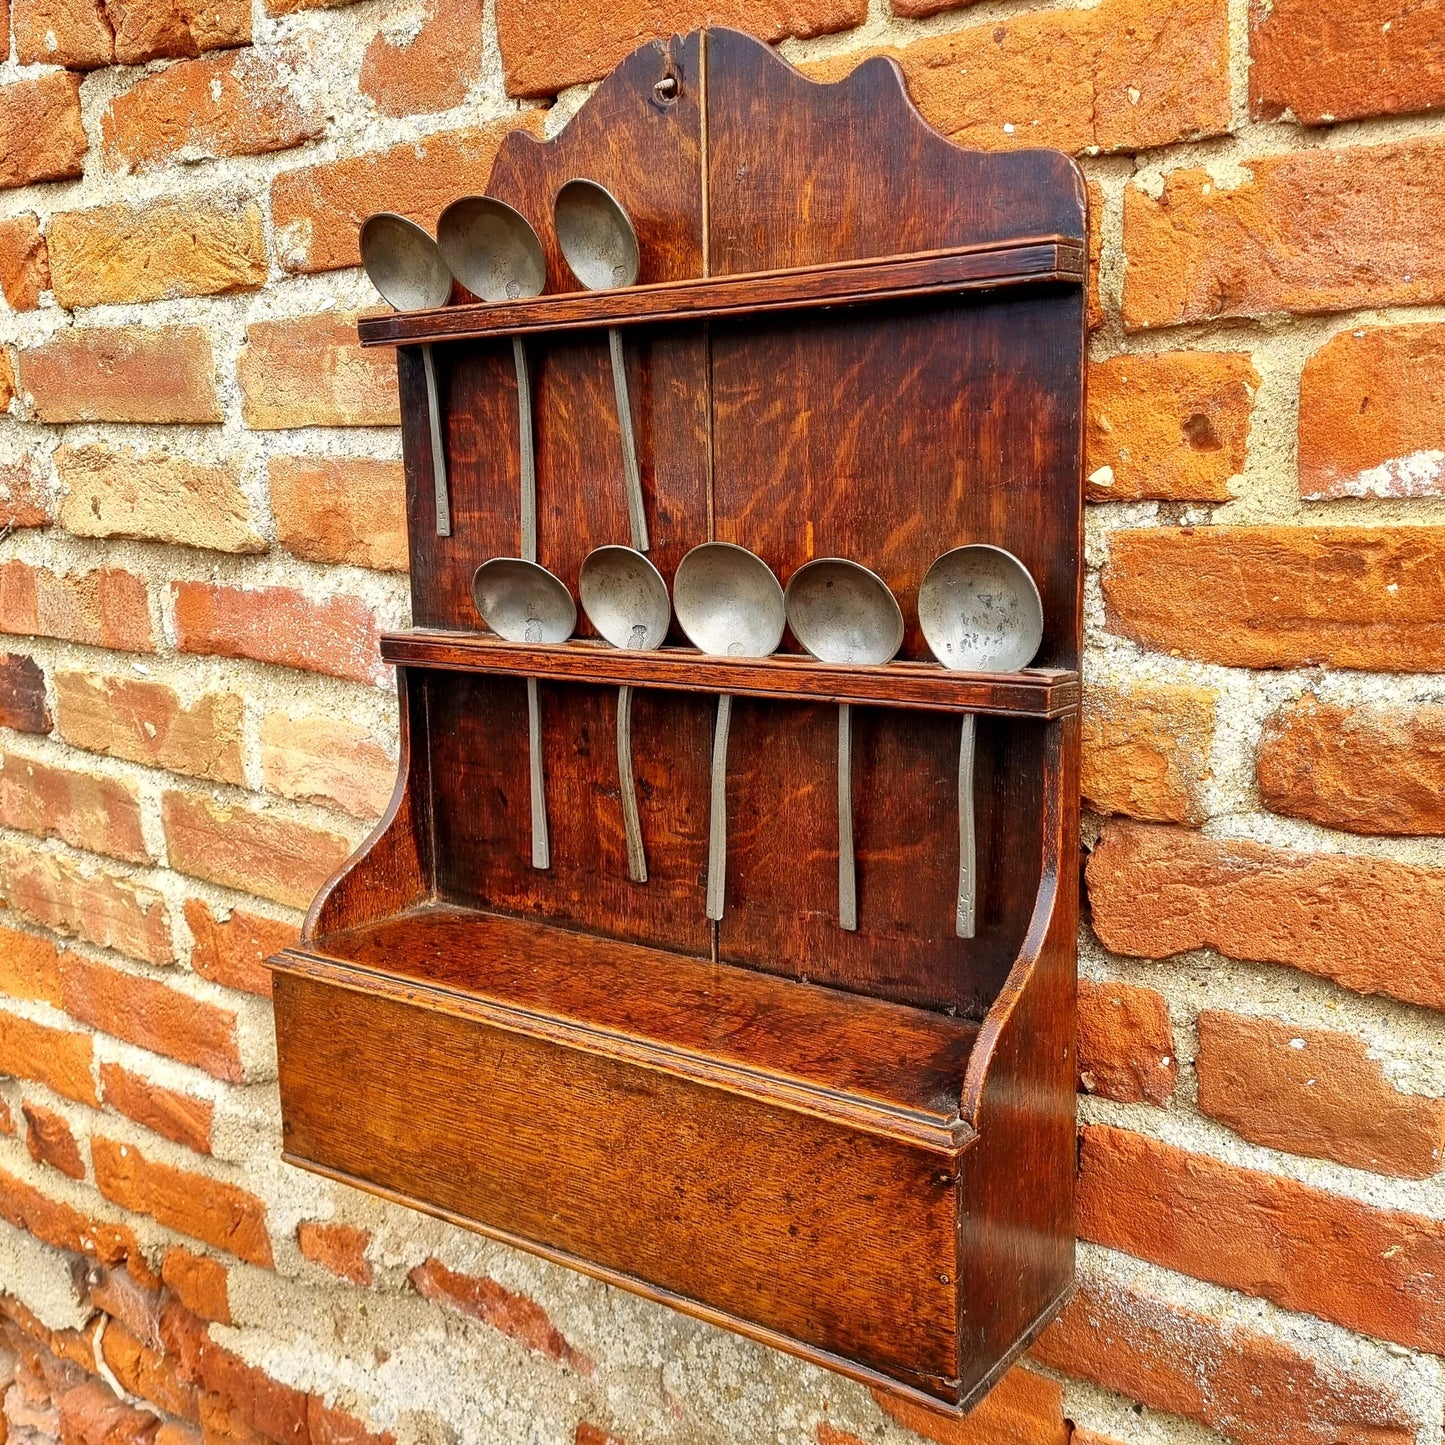 Late 18th Century English Antique Oak Spoon Rack with an Associated Set of Eight 17th Century Antique Pewter Slip Top Spoons